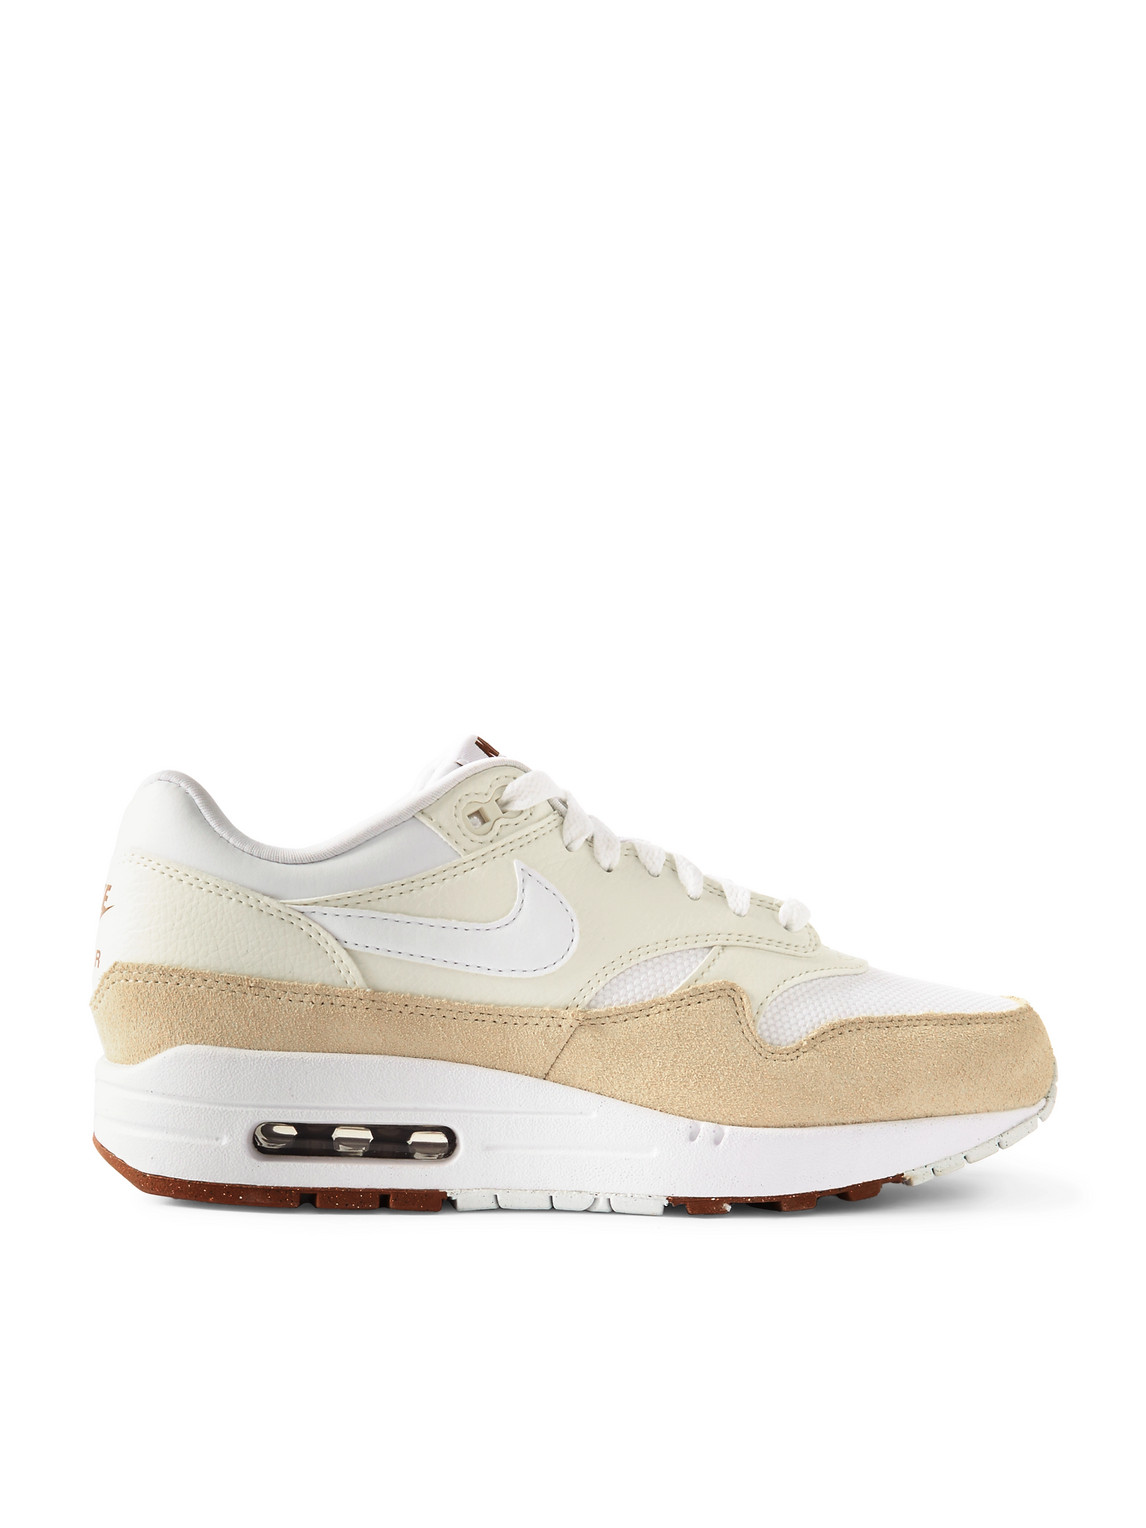 Nike Air Max 1 Sc Suede, Mesh And Leather Sneakers In Neutrals